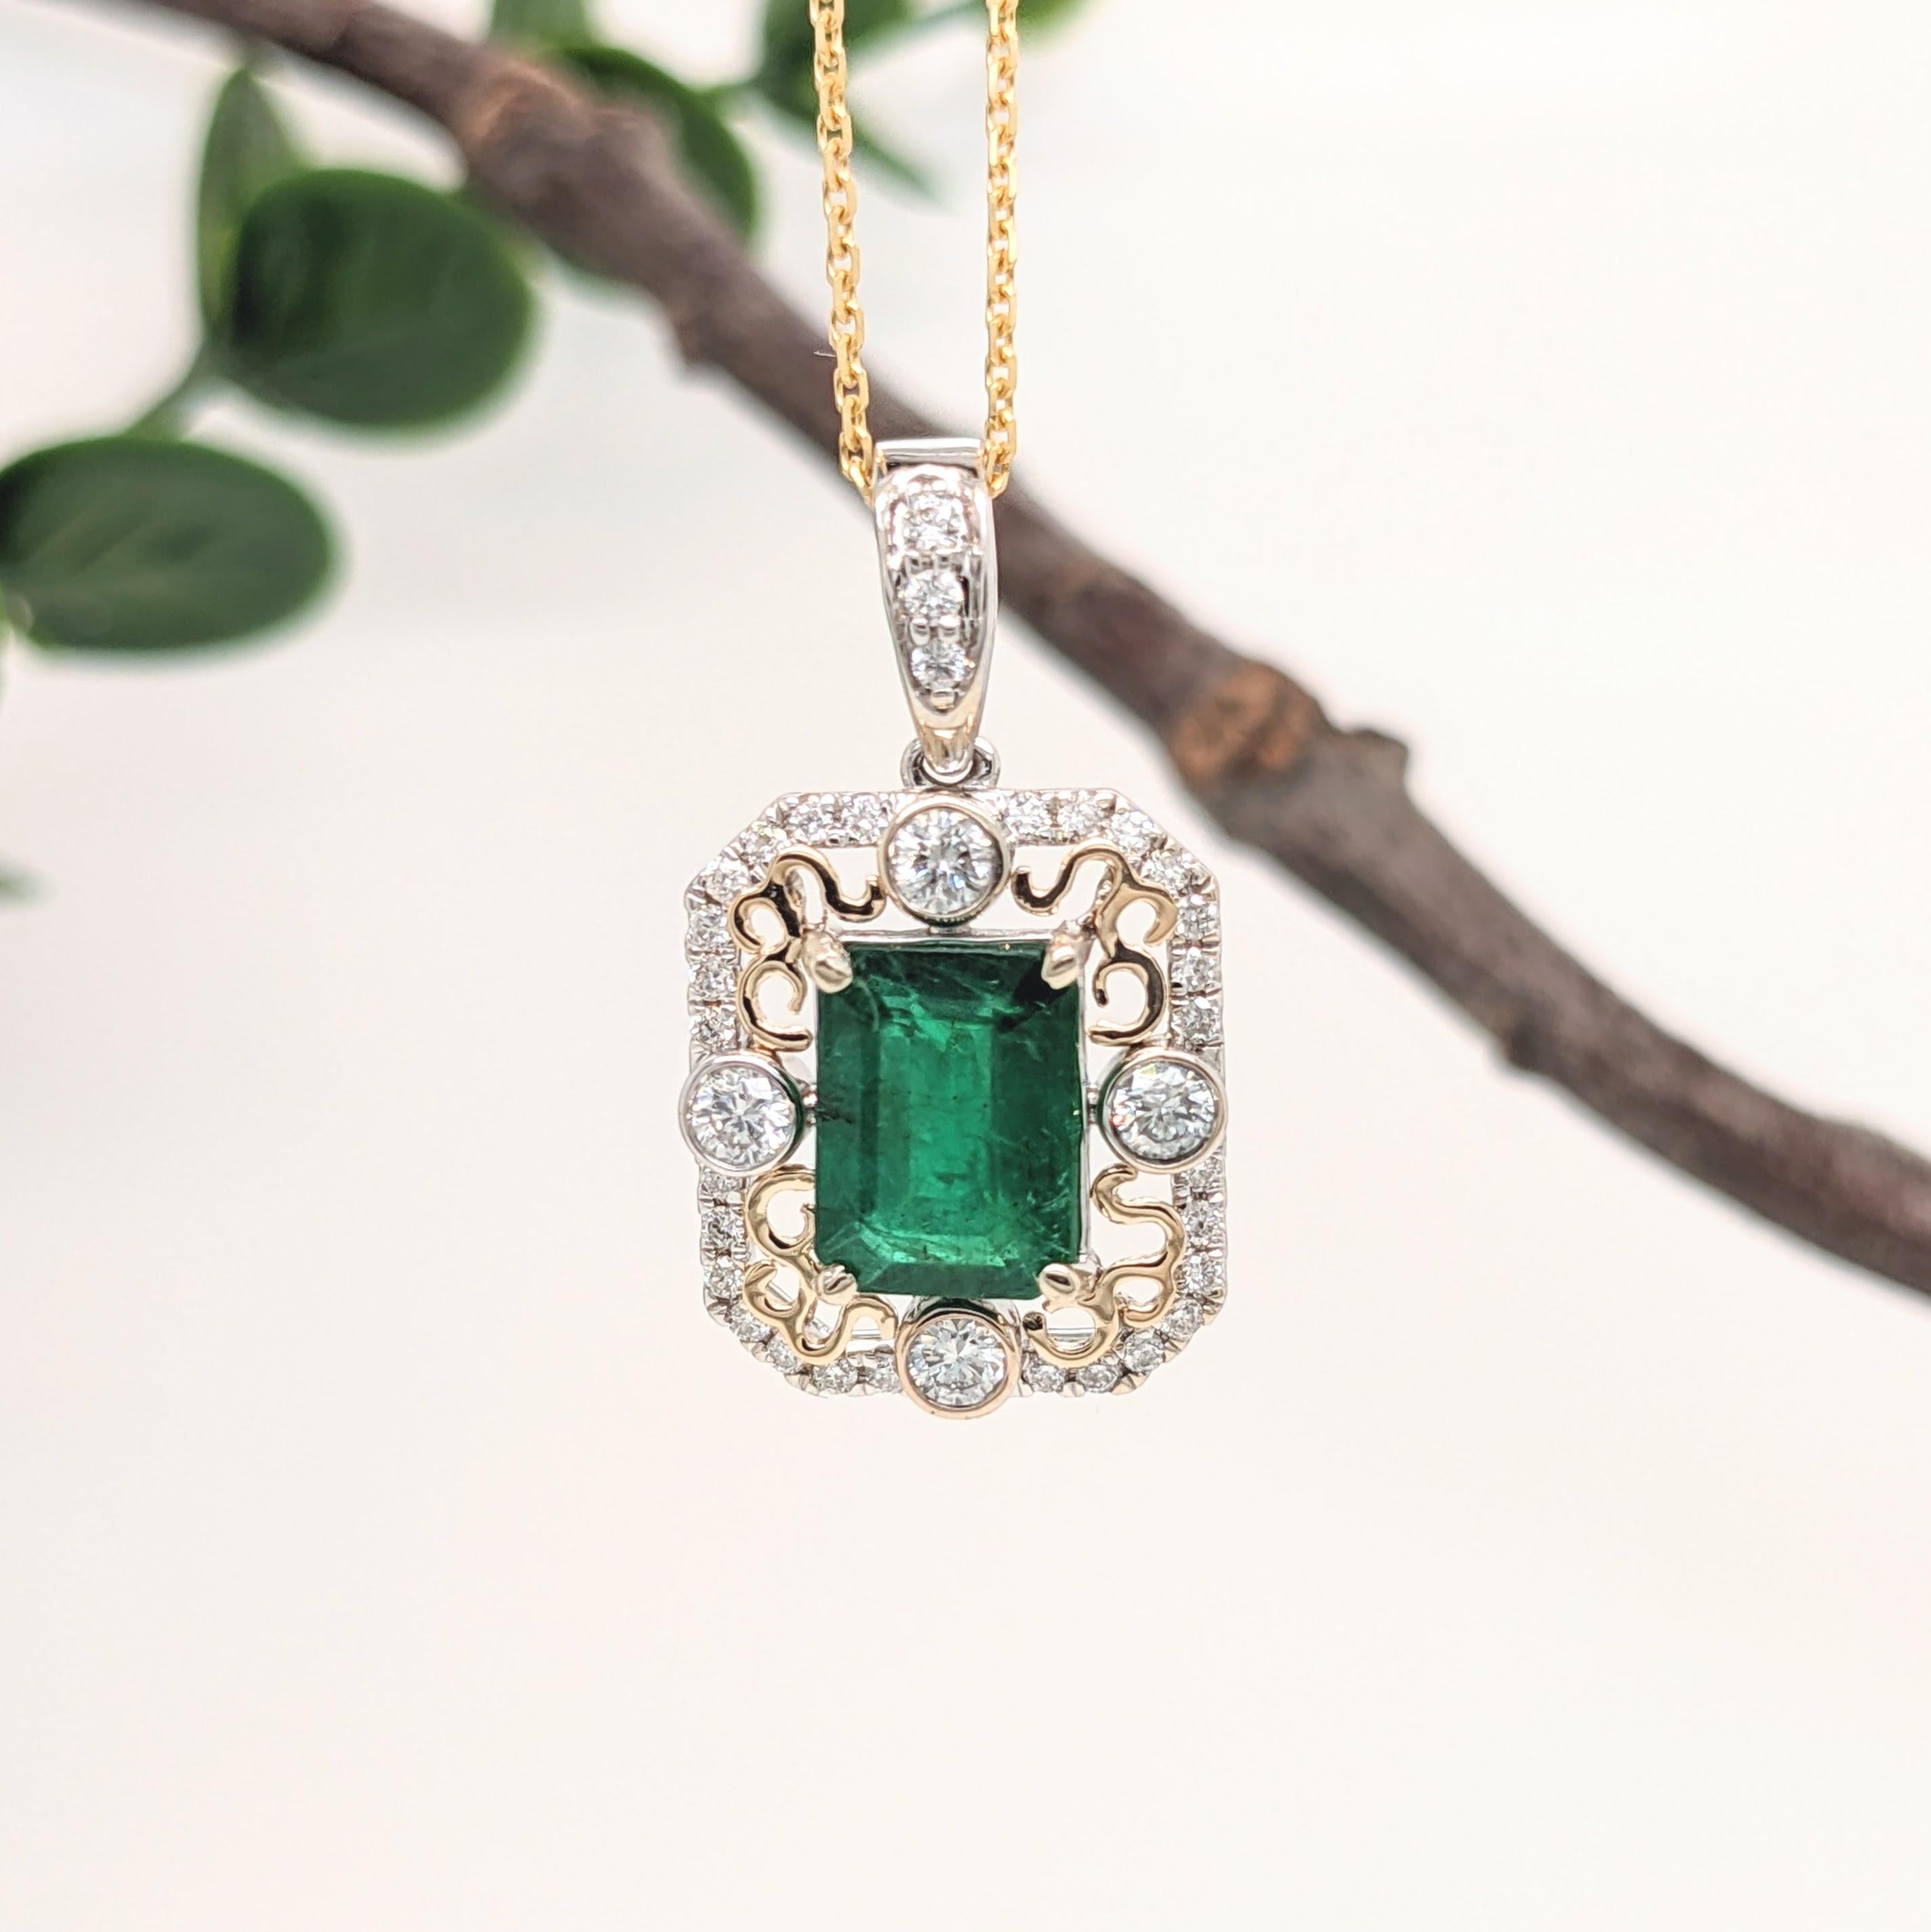 Specifications

Item Type: Pendant
Stone: Emerald
Stone size: 9x7mm
Stone weight: 1.46cts
Treatment: Oiled
Hardness: 7.5-8
Cut: Faceted
Shape: Emerald

Metal: 14k/2.46g
Diamonds S/I GH: 46/0.35cts

Sku: AJP225/3977

This pendant is made with solid